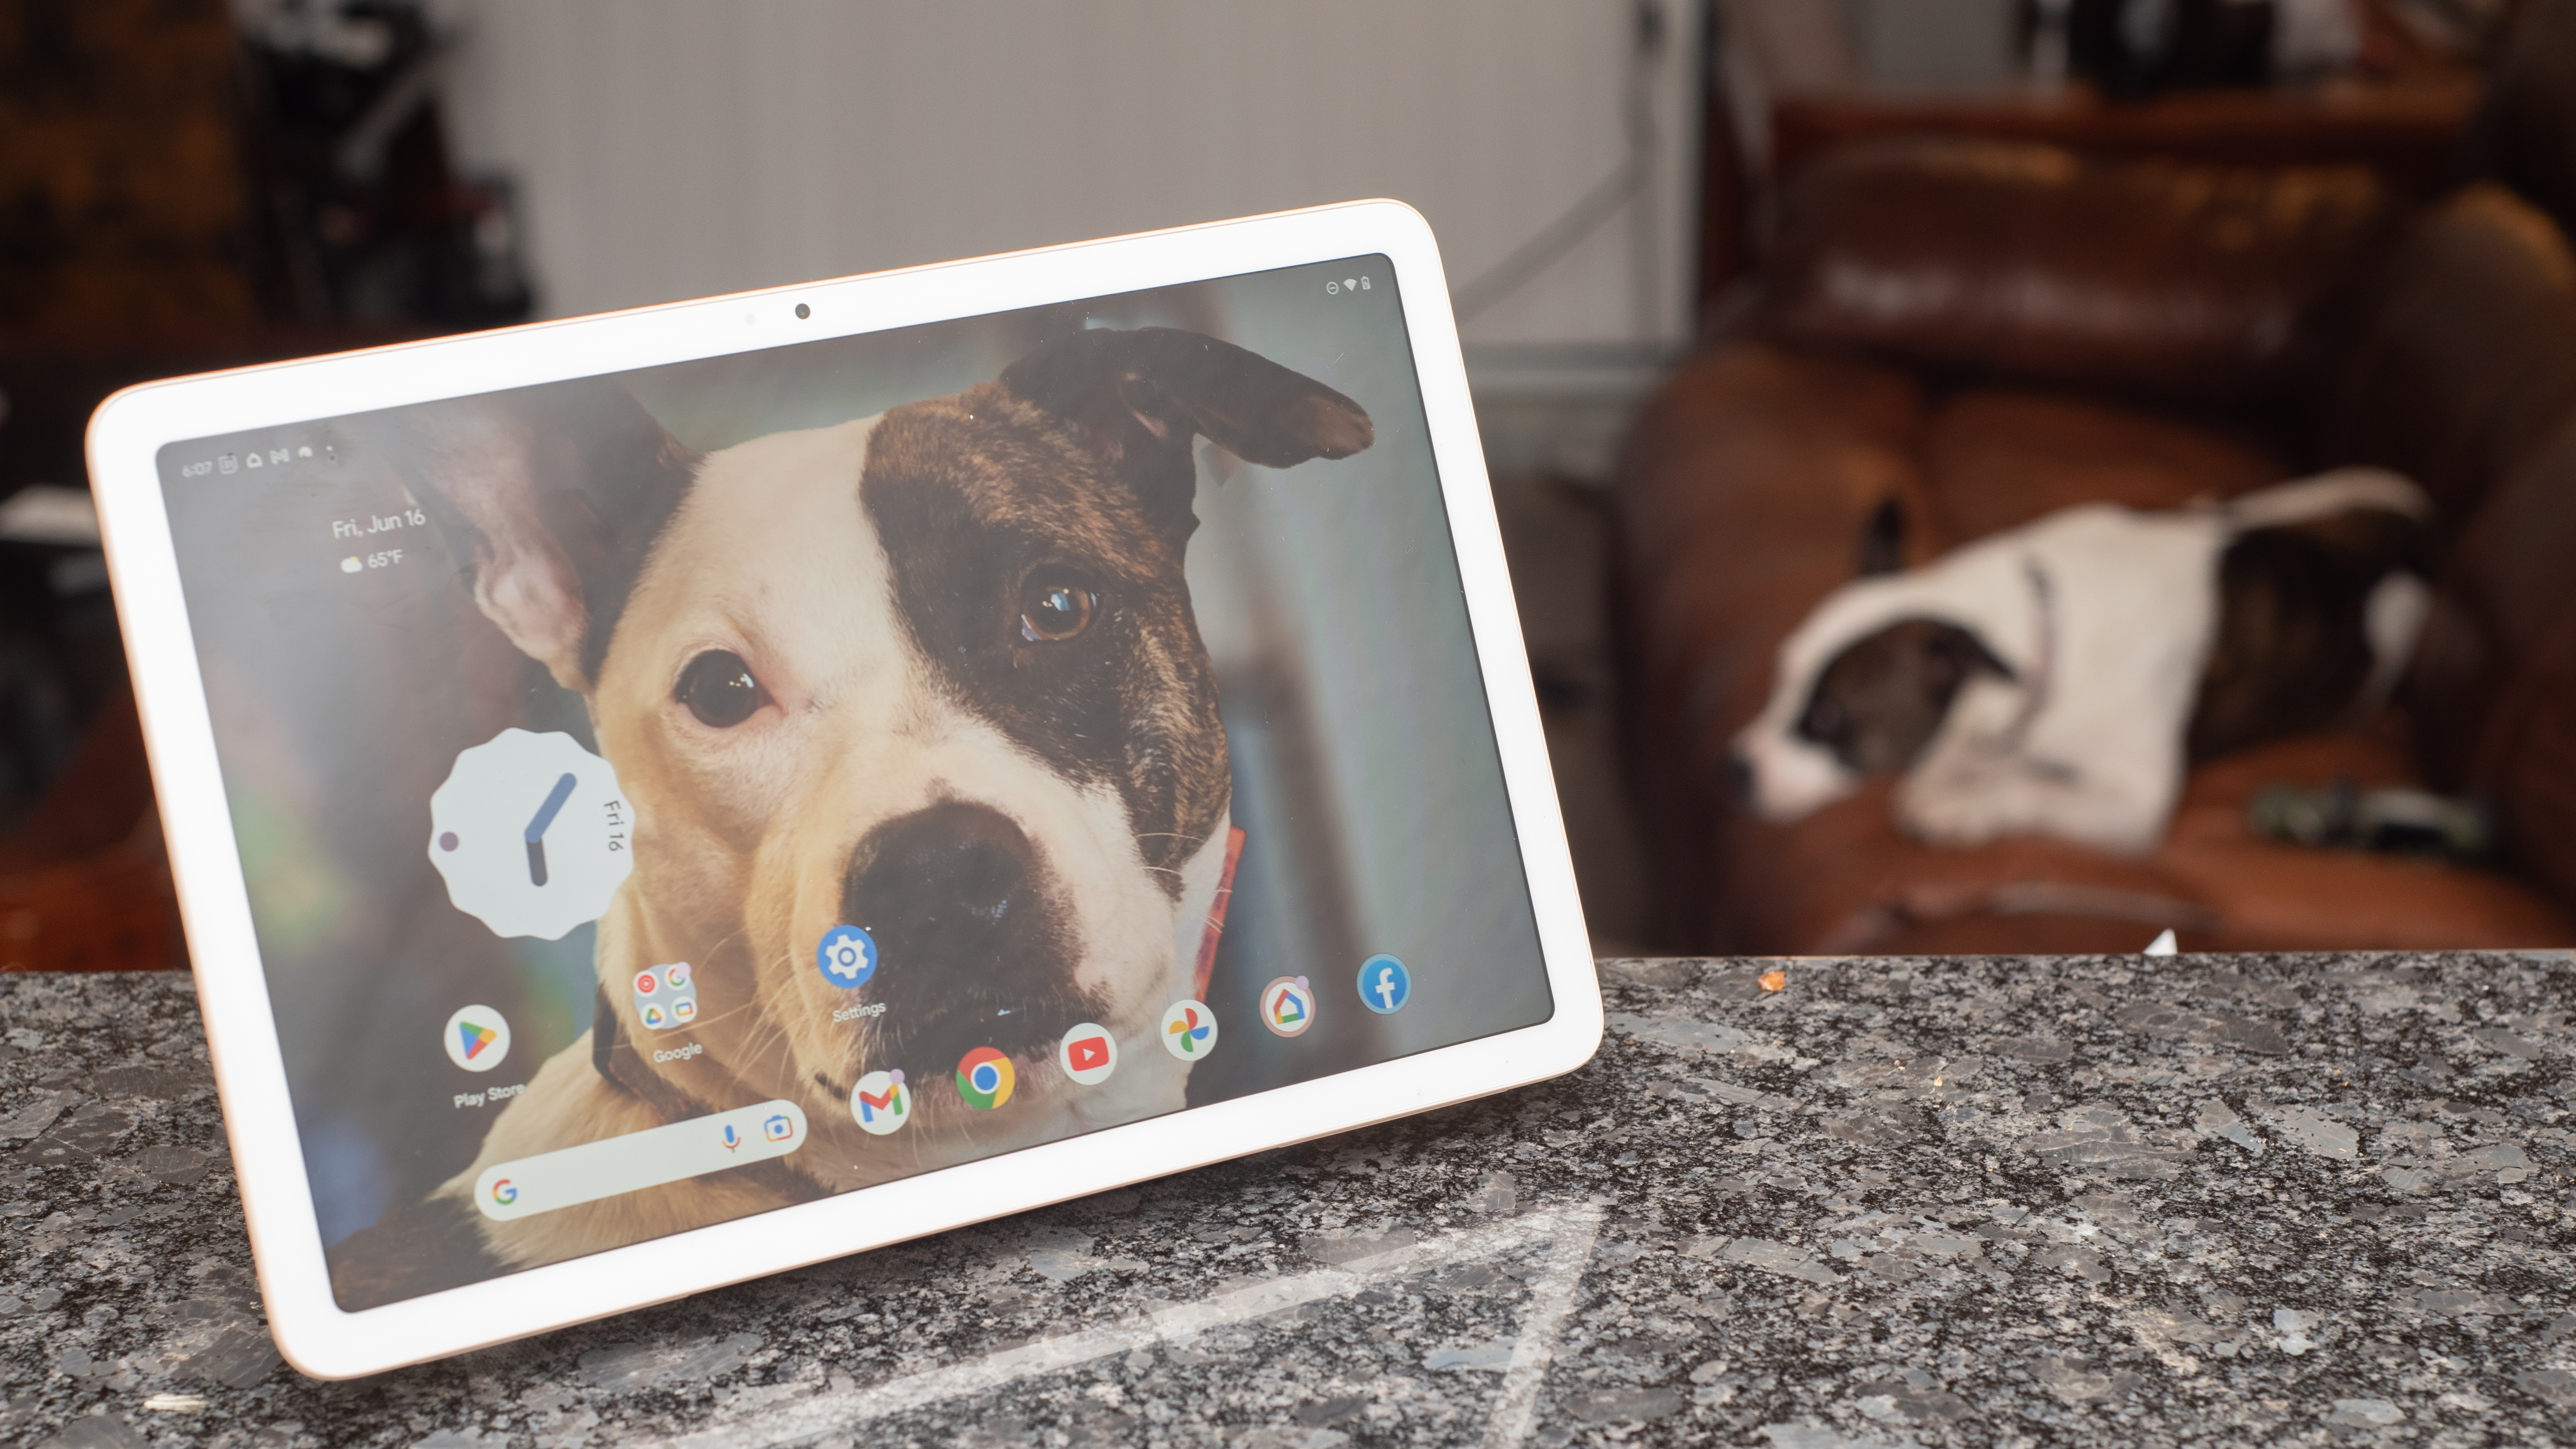 We just got a big hint that a Google Pixel Tablet 2 is on the way